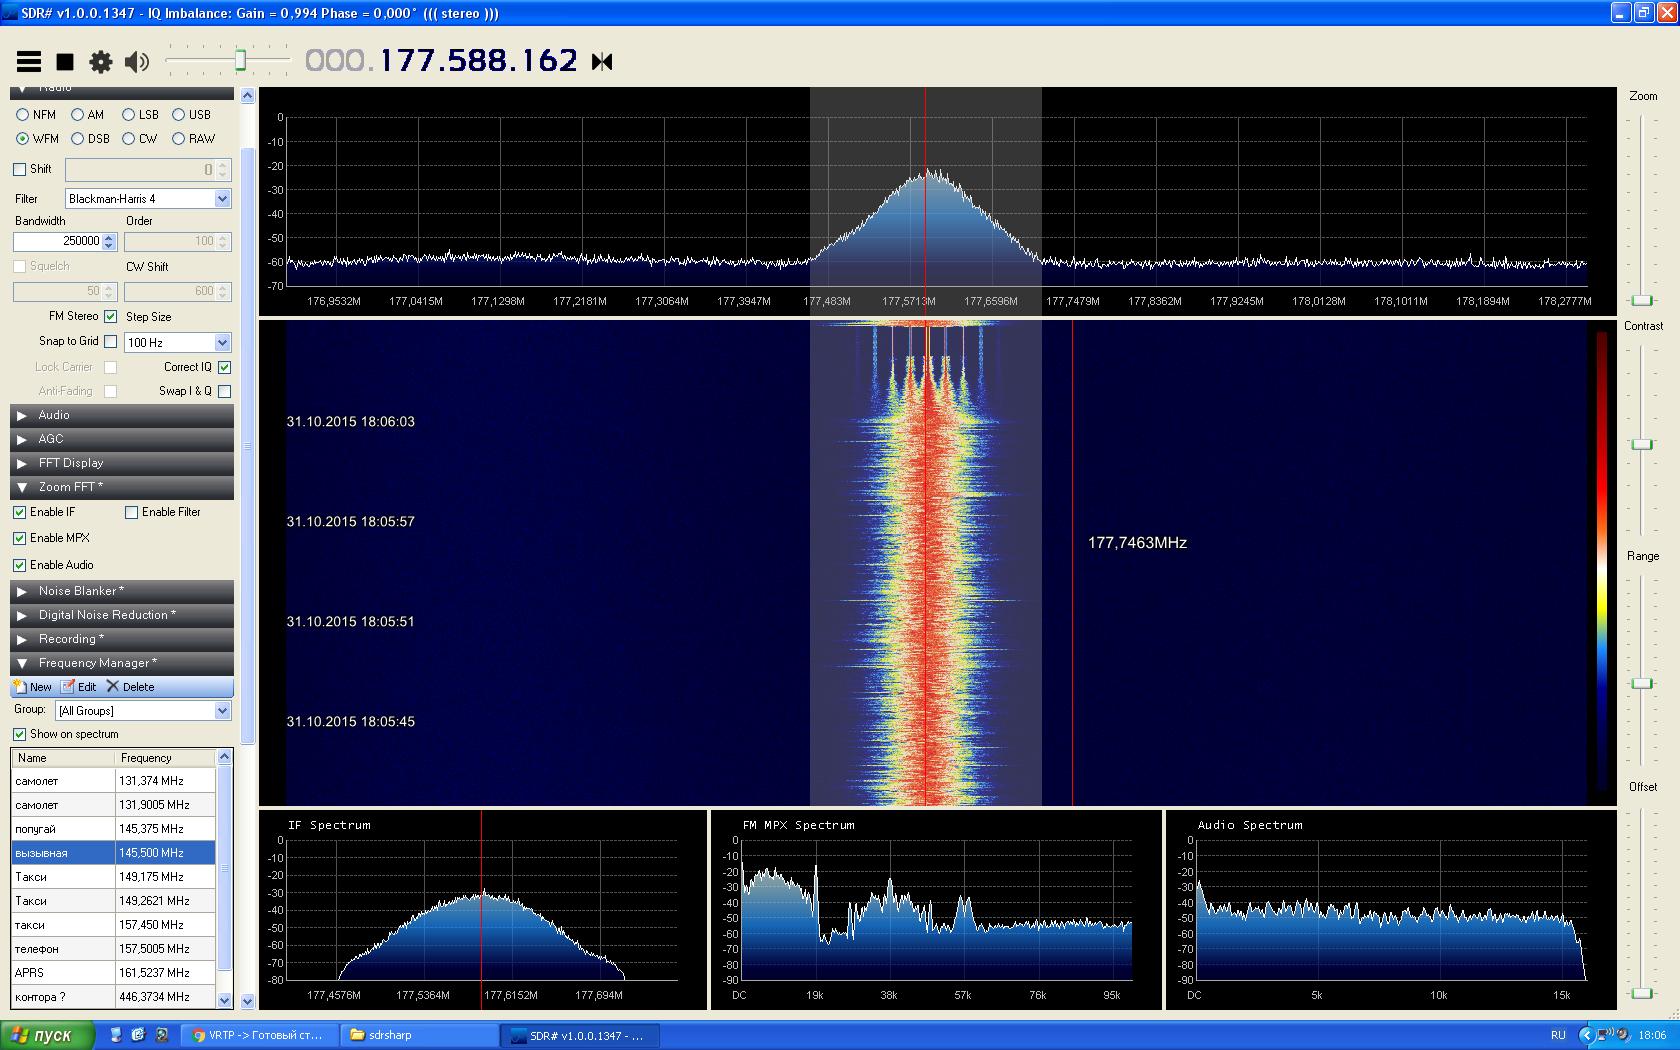 Sdr android